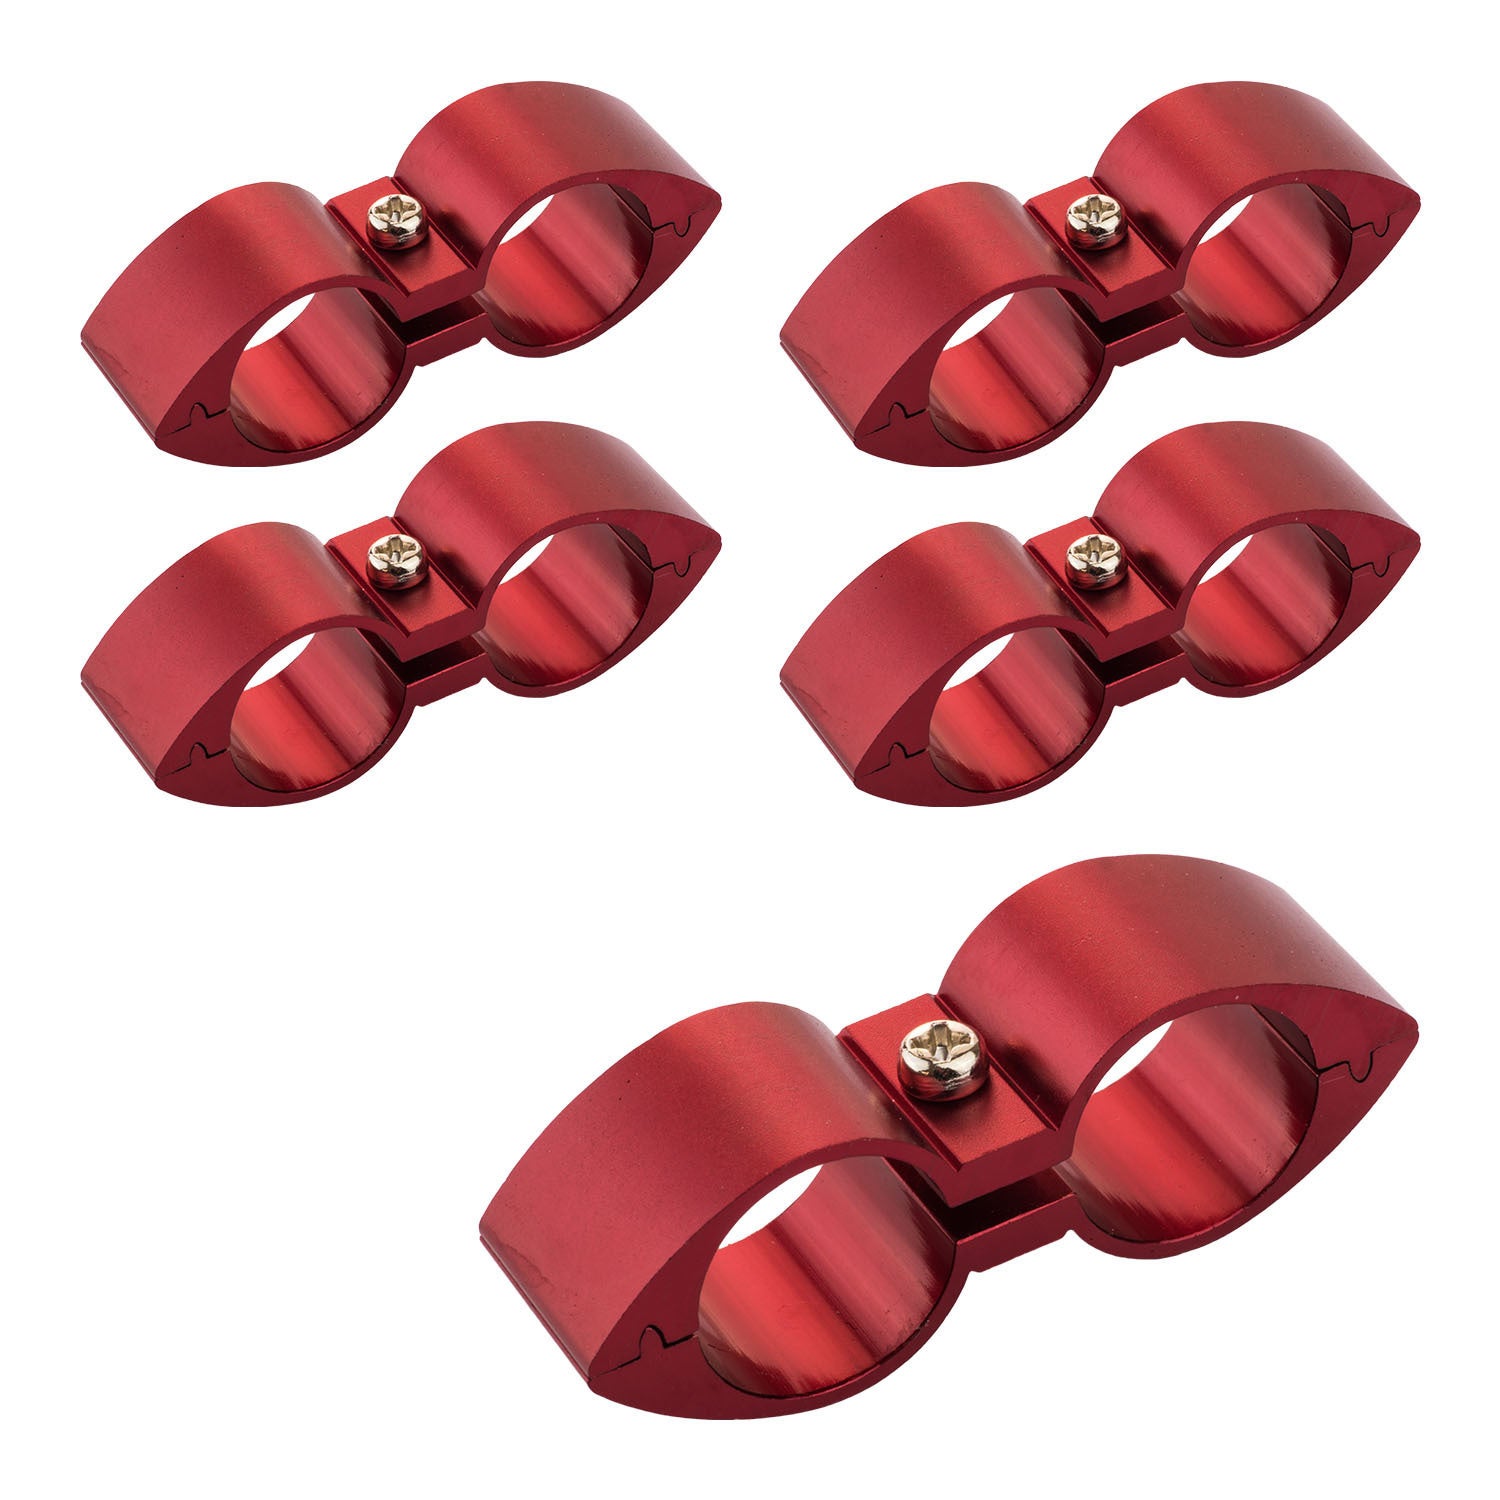 Proflow Twin Hose Clamp Separators 5 pack 04AN Red 11mm Hole PFE155-04R